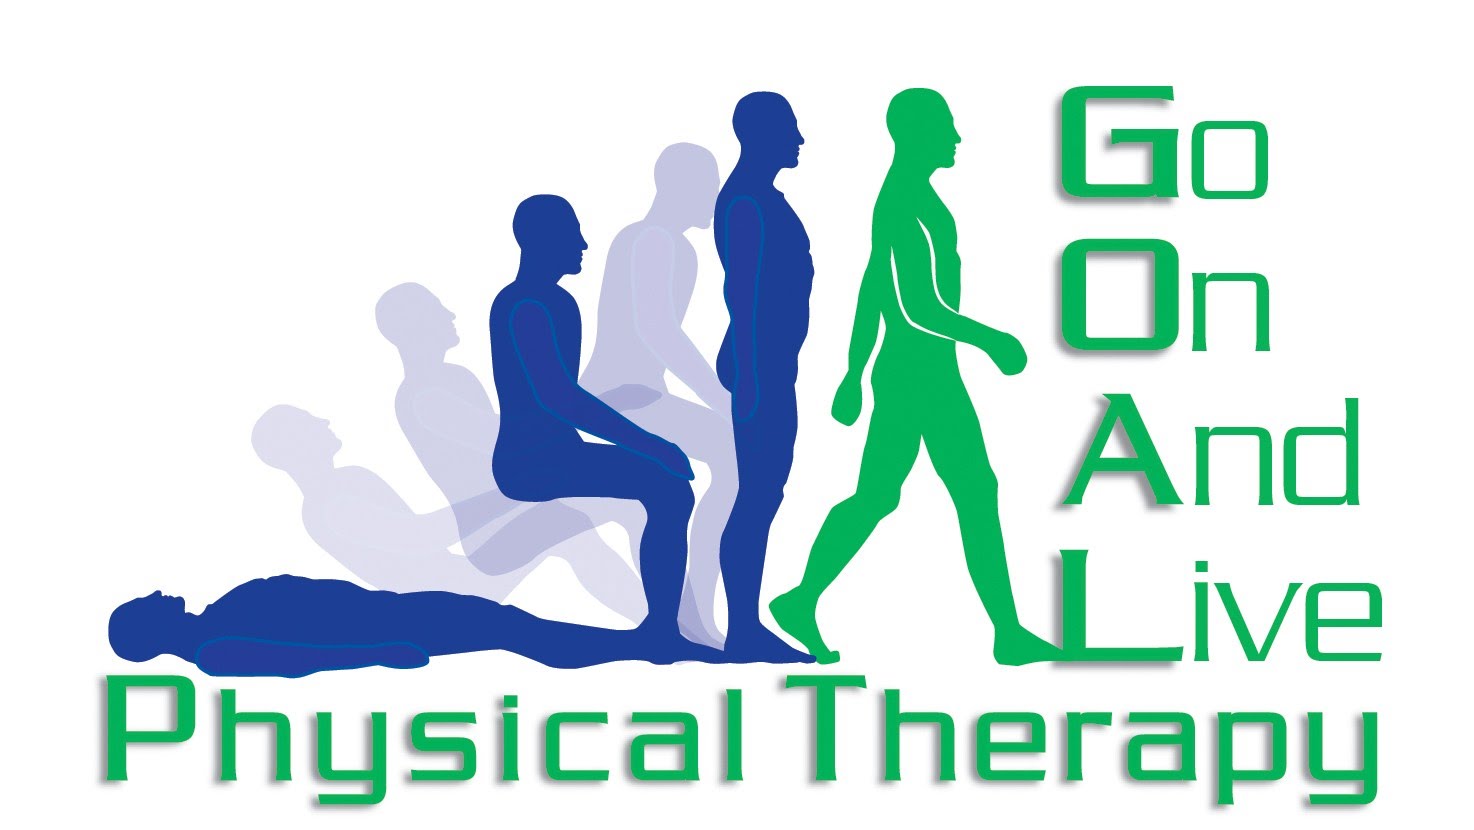 therapy clipart physical rehabilitation